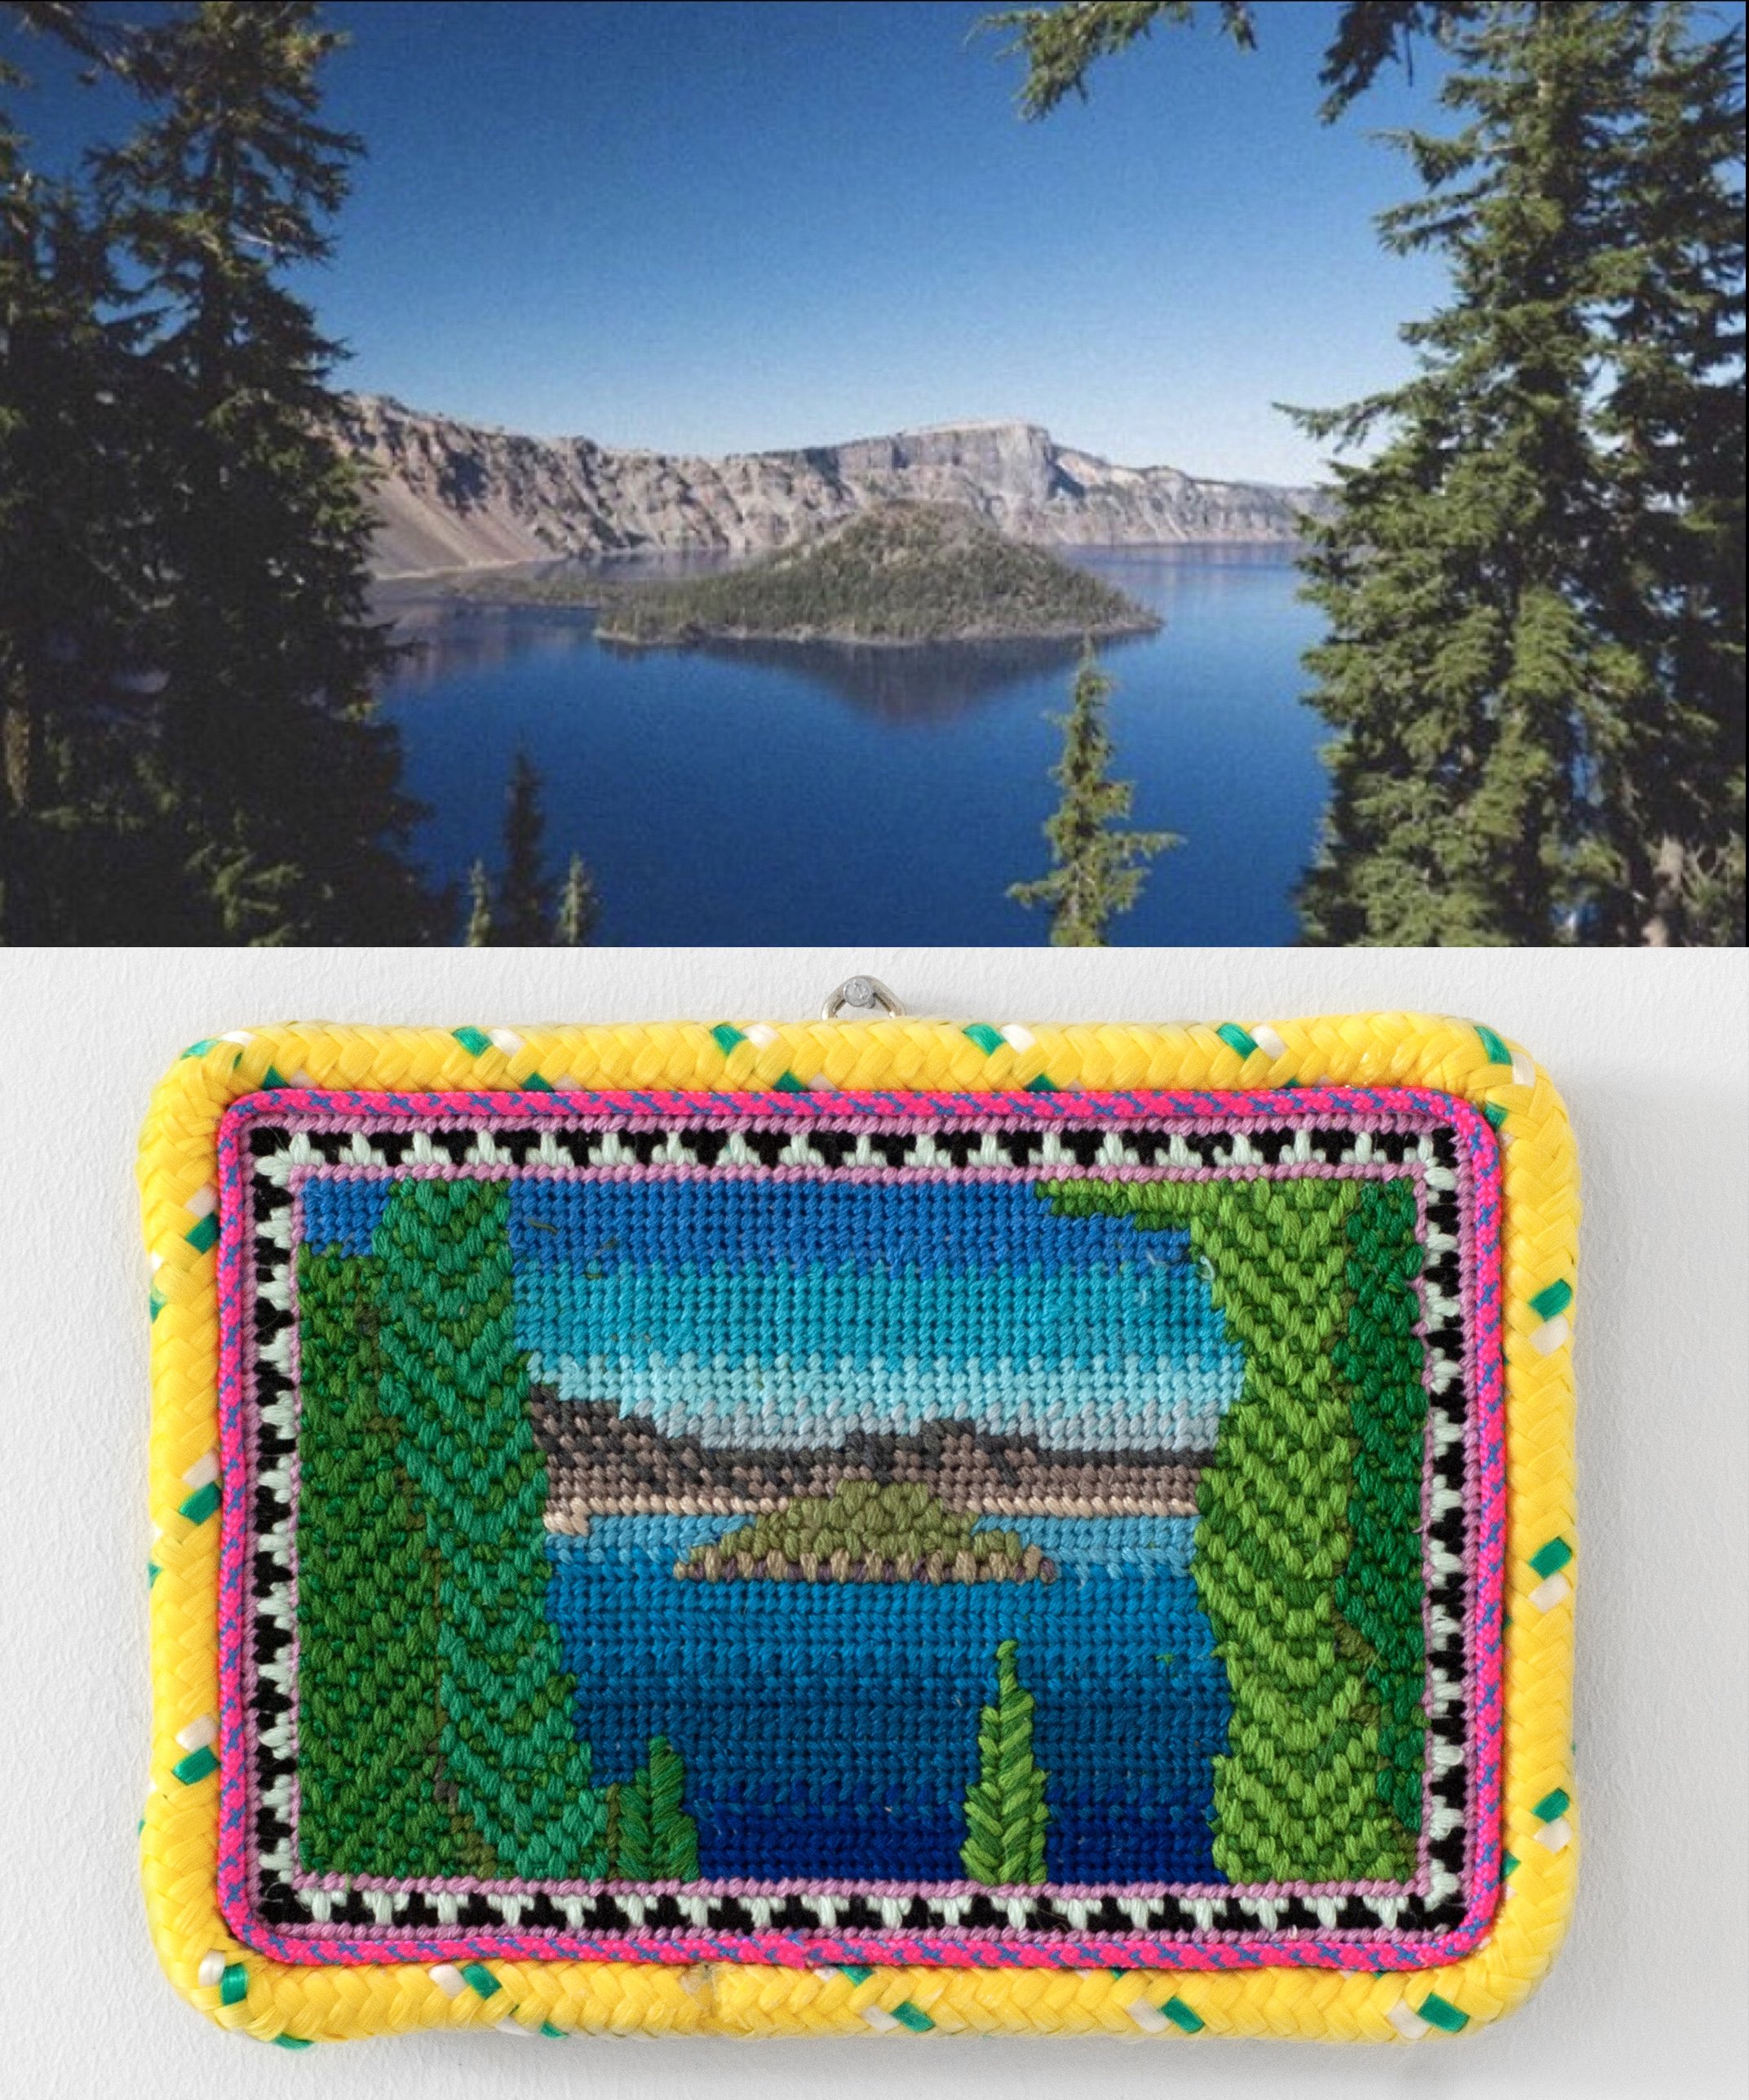 Crater Lake National Park (Private Commission)